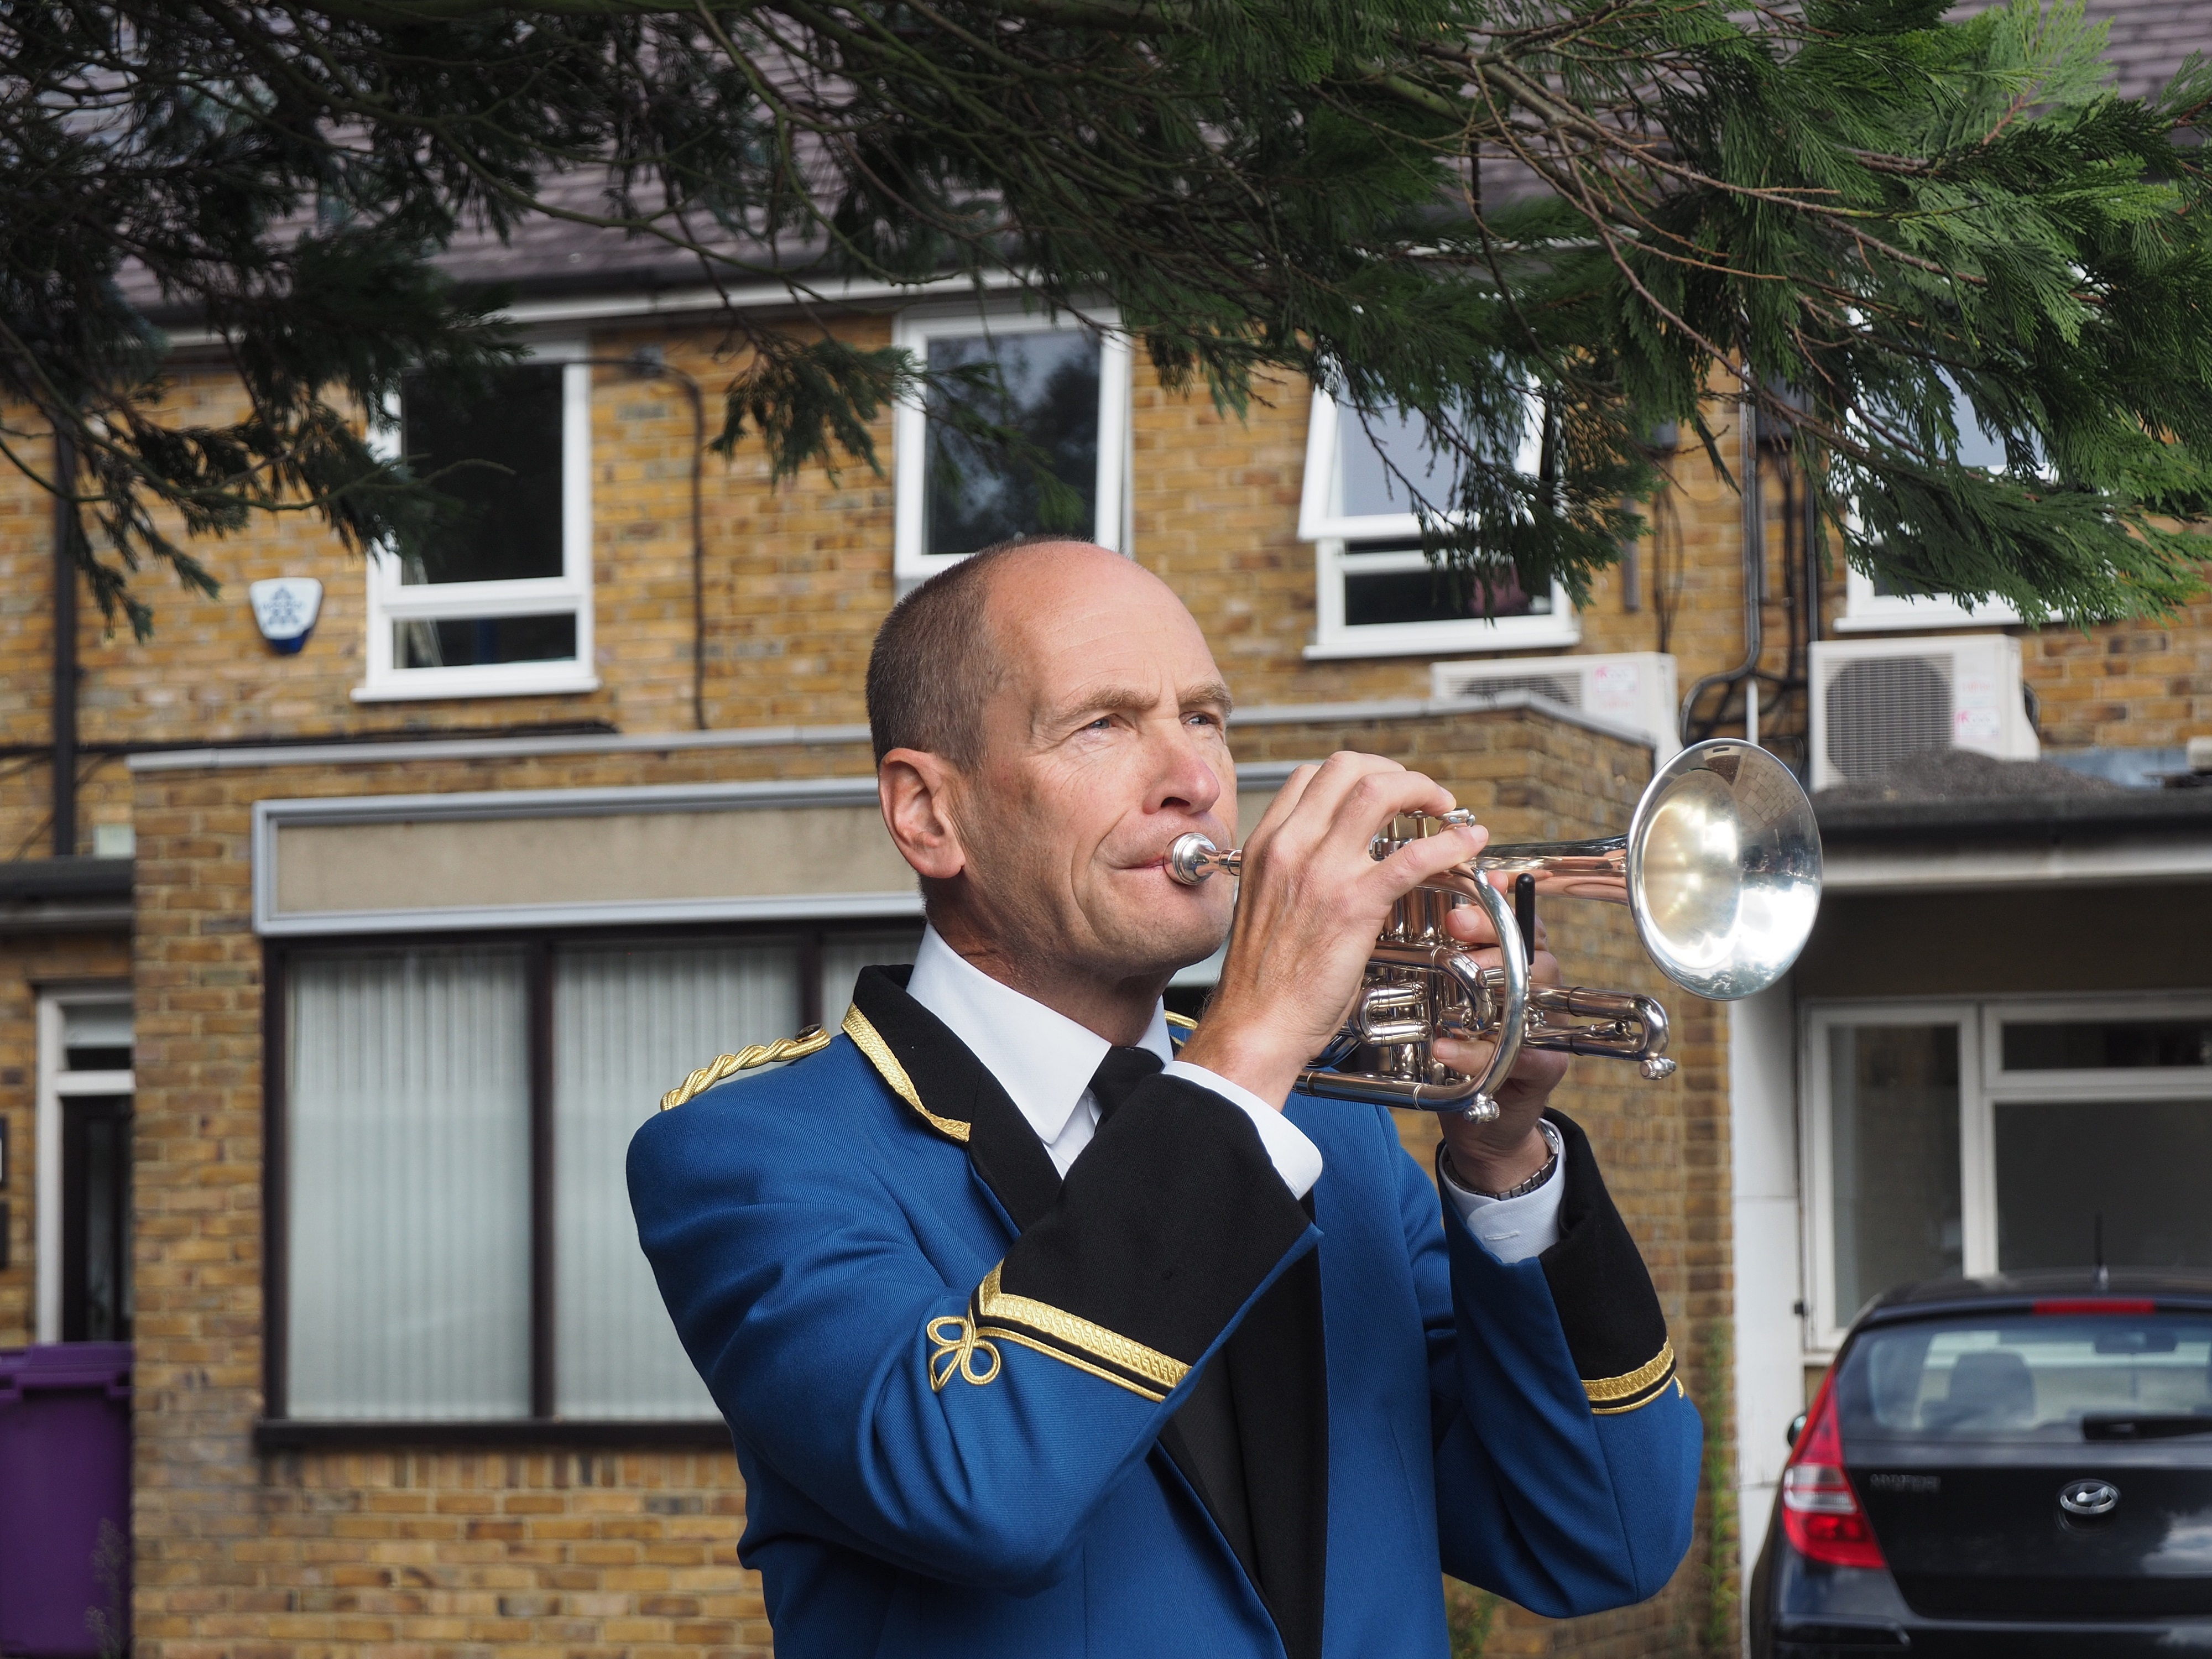 Mike Hurford from the London Metropolitan Brass Band performed The Last Post at the Tommy sculpture unveiling ceremony. 